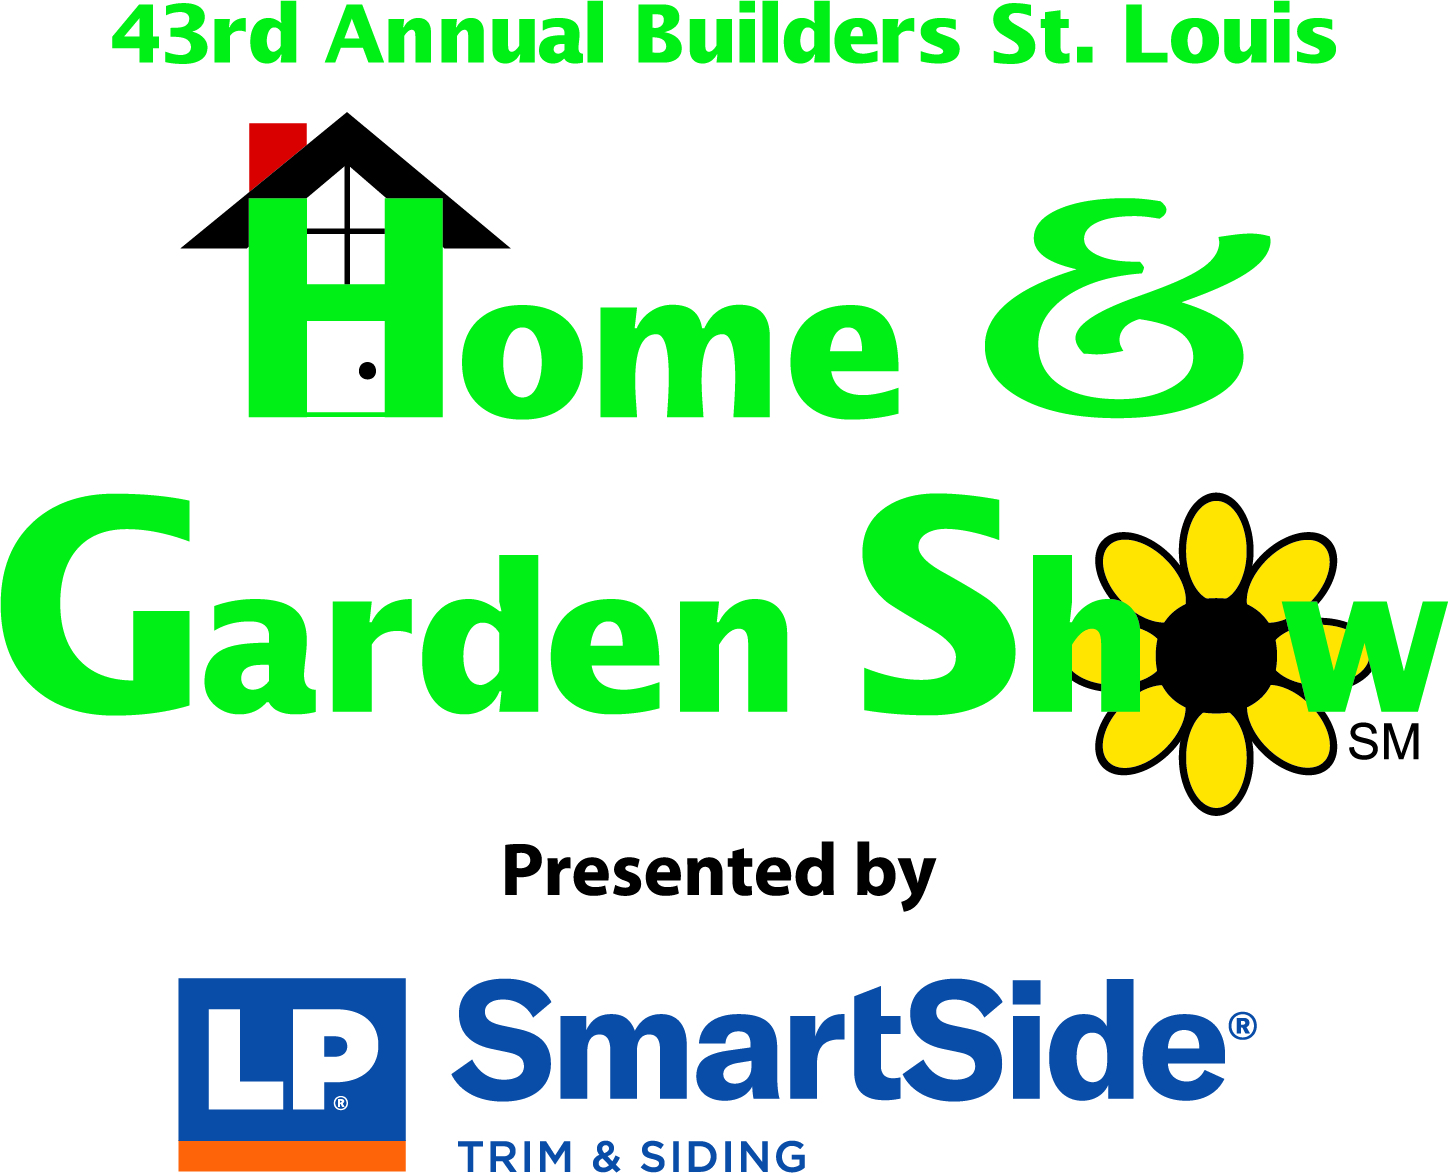 43rd Annual Builders St. Louis Home & Garden Show, Presented by LP SmartSide Trim & Siding